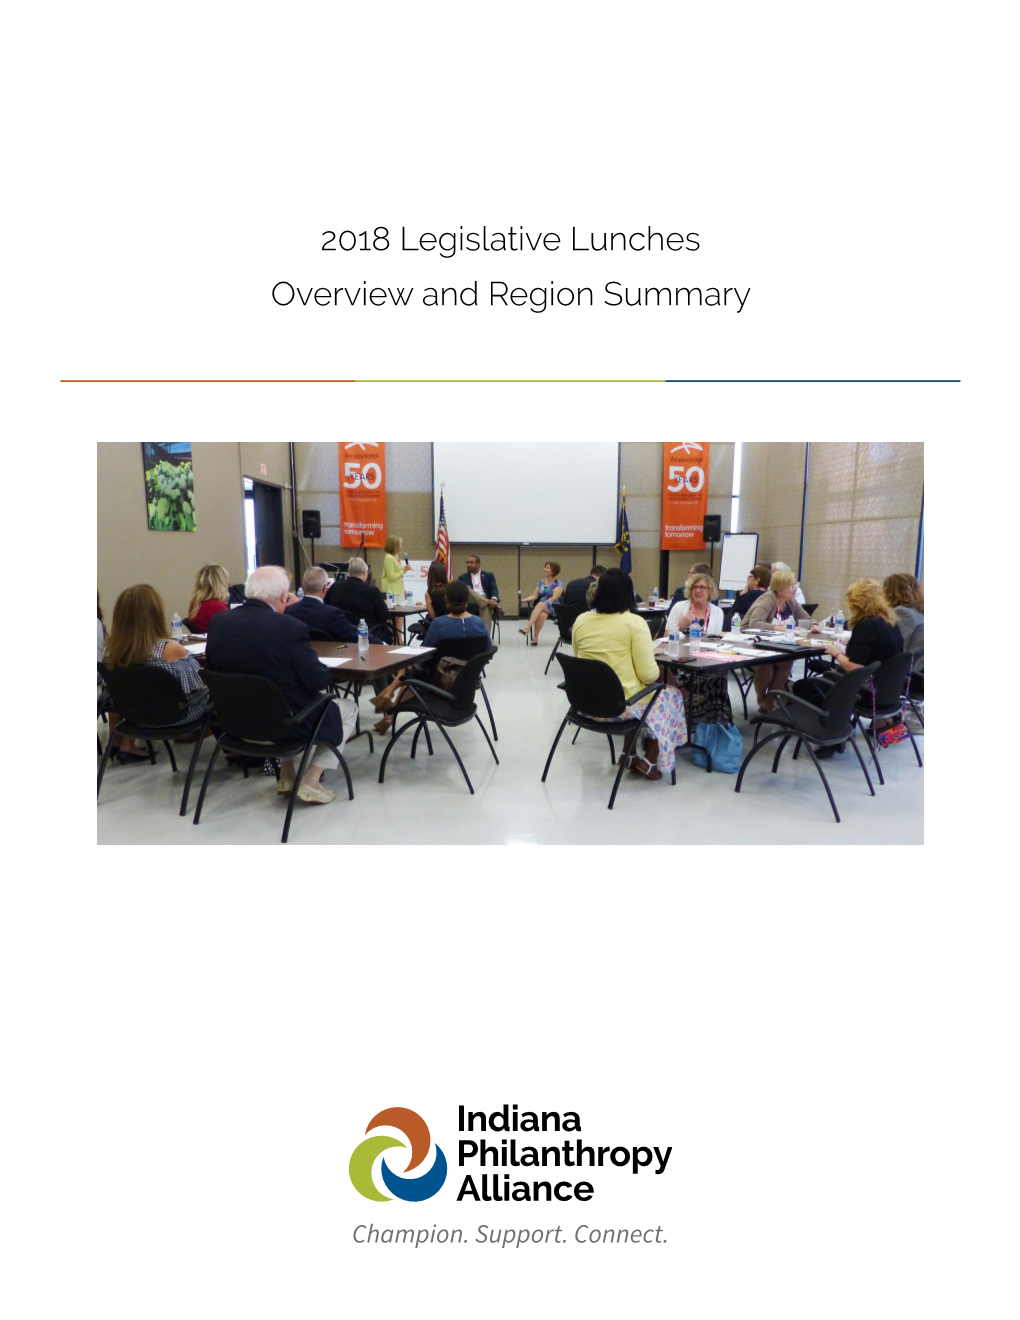 2018 Legislative Lunches Overview and Region Summary Overview